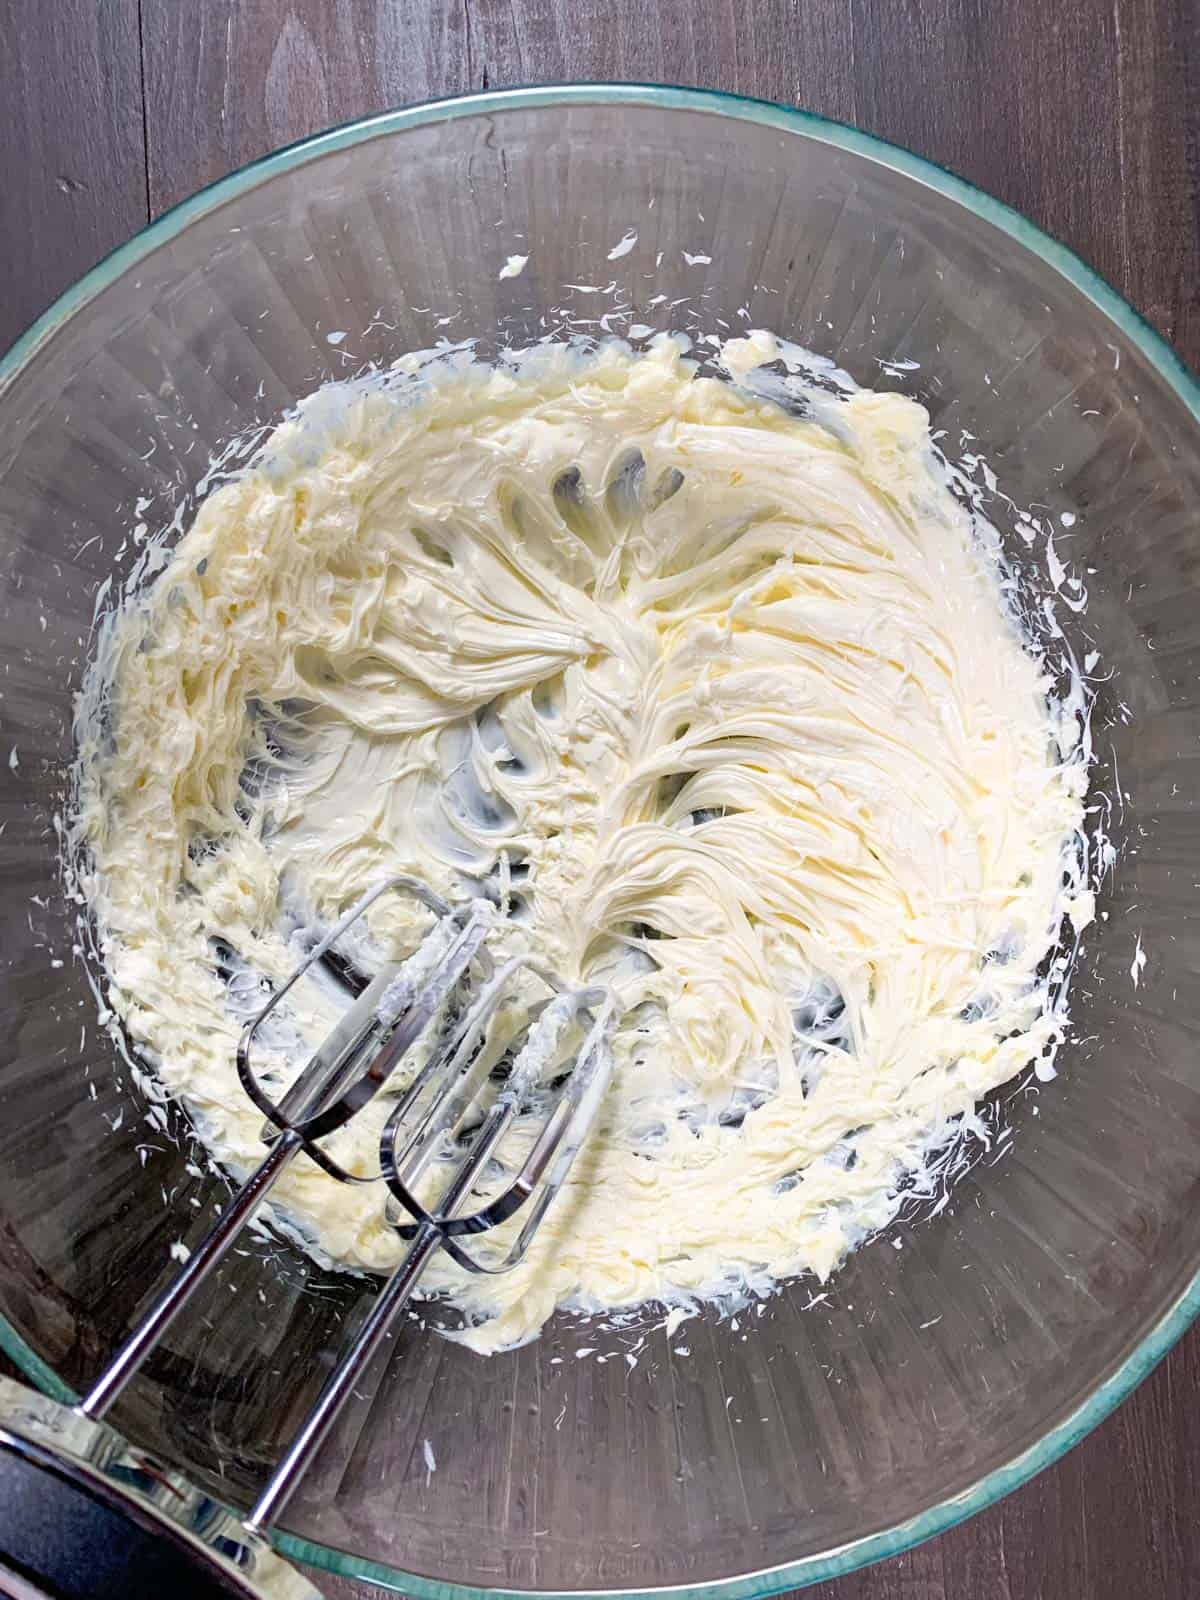 beating butter in a large bowl.